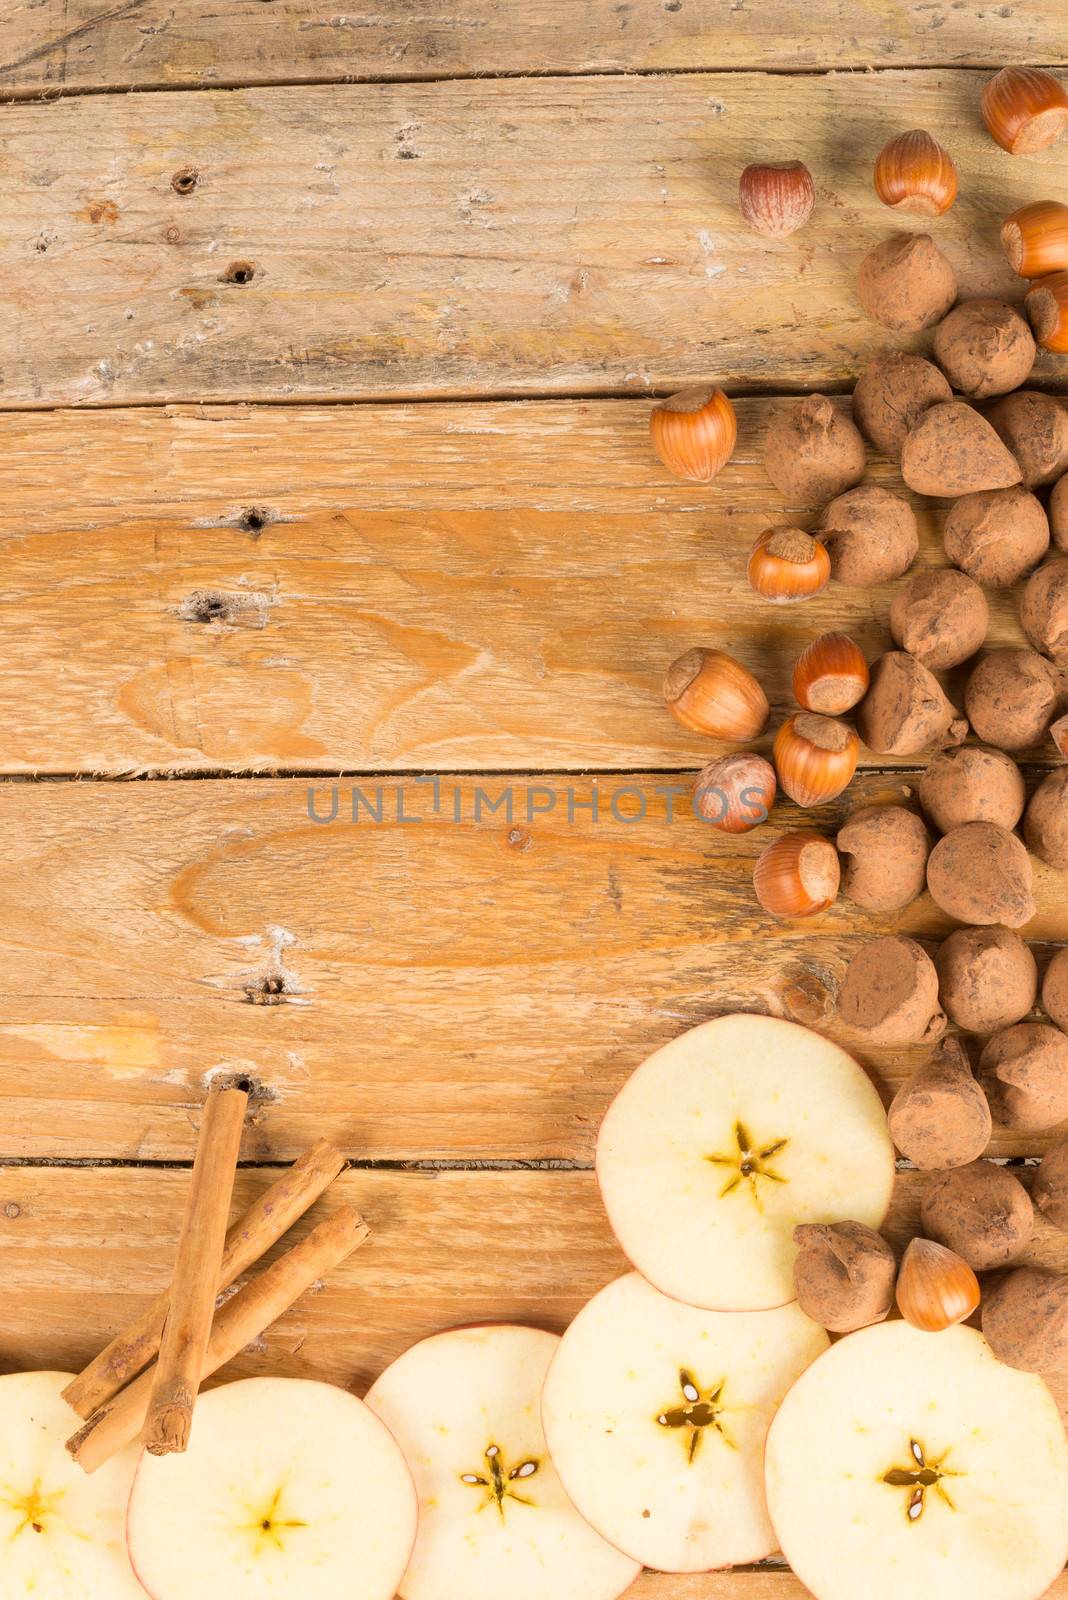 Food background with seasonal ingredients on a wooden surface